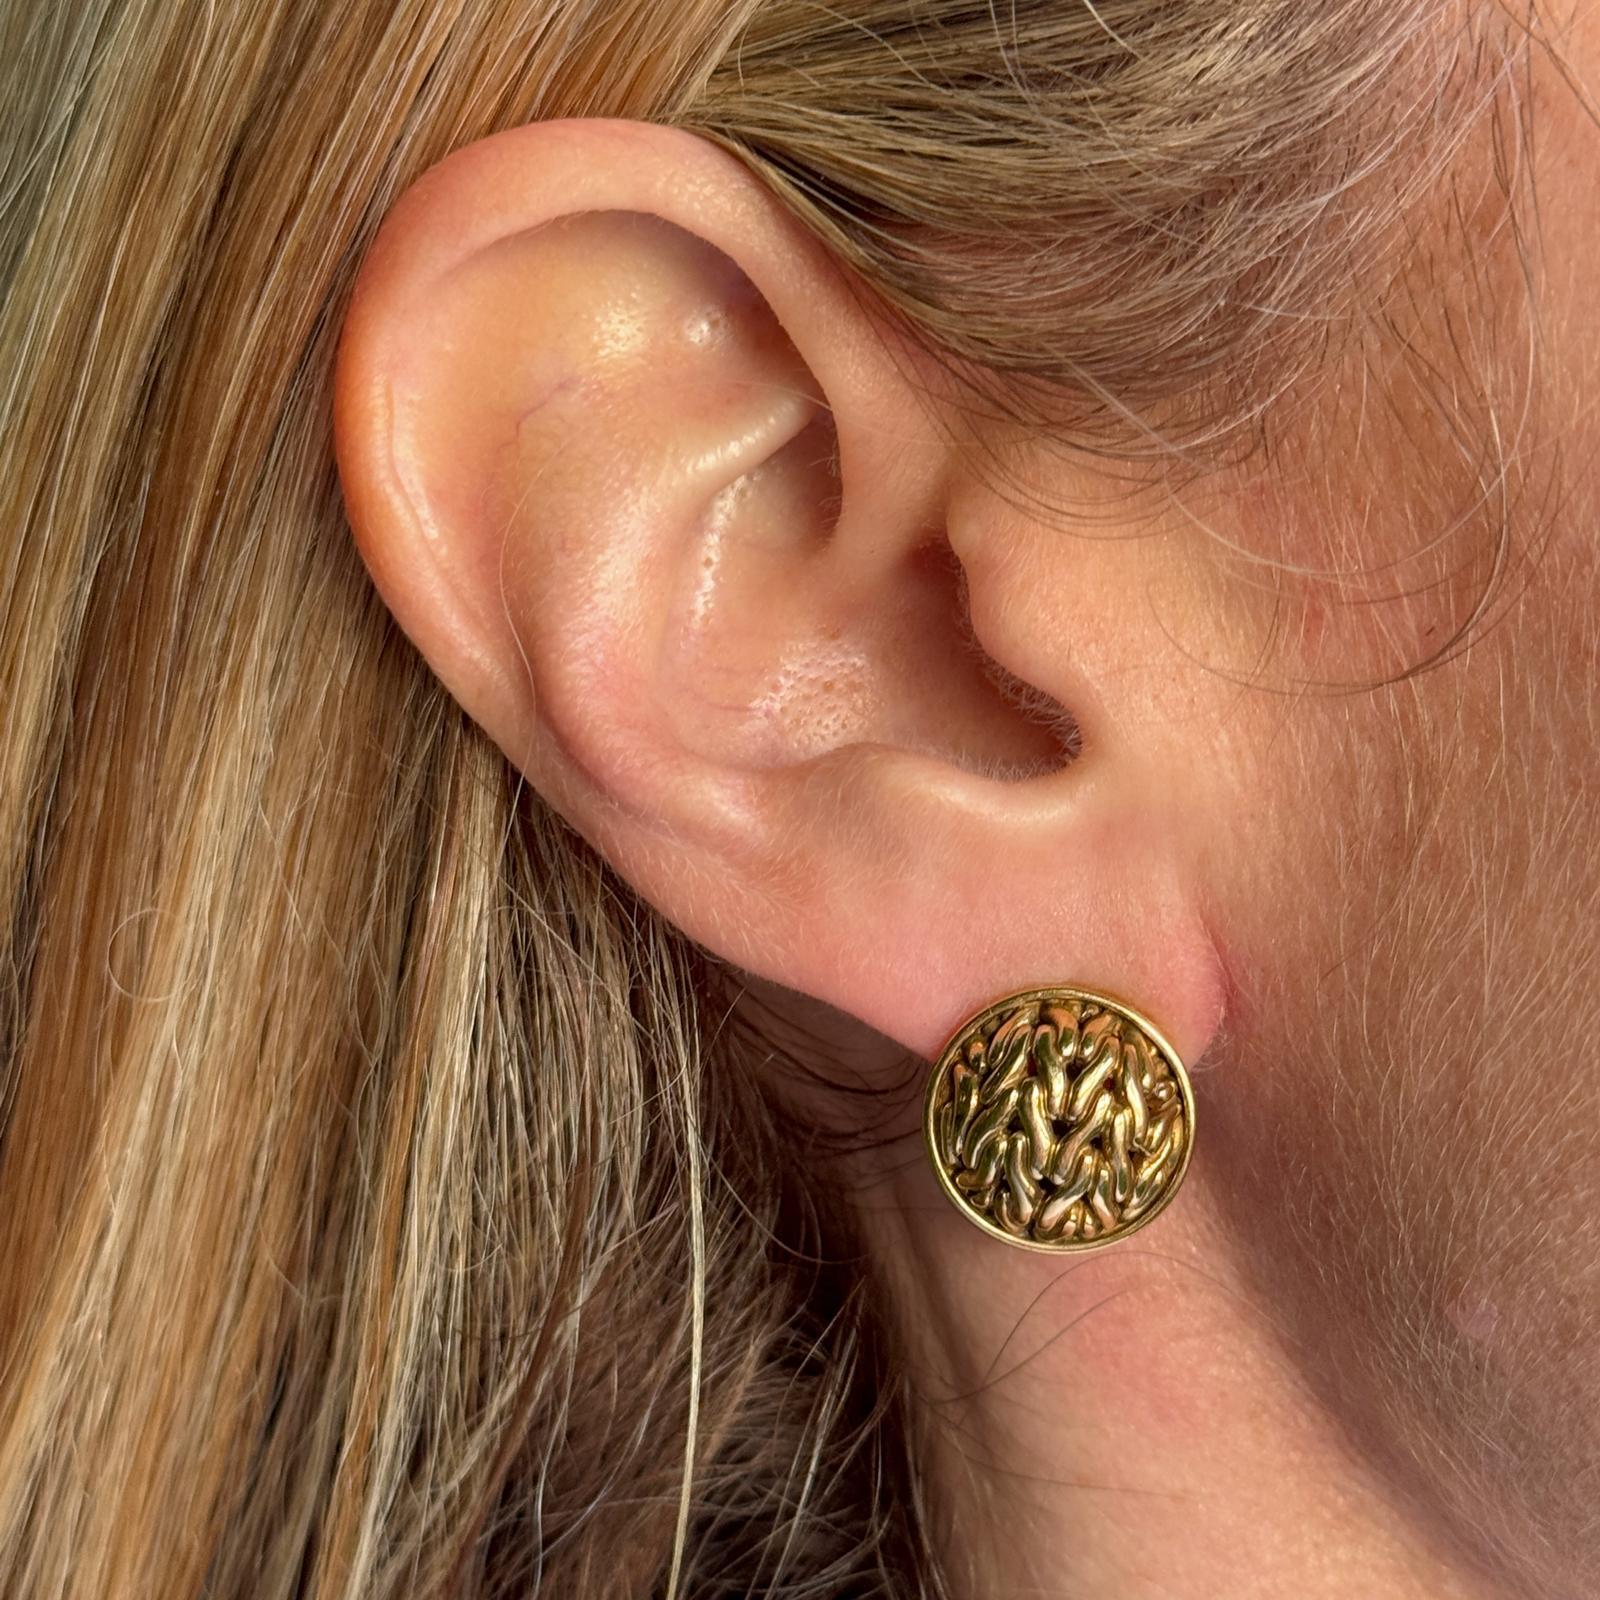 John Hardy button earrings crafted in 18 karat textured yellow gold. The earrings measure 15mm in diameter and feature lever-backs. Signed JH 18K. Weight: 10.3 grams.